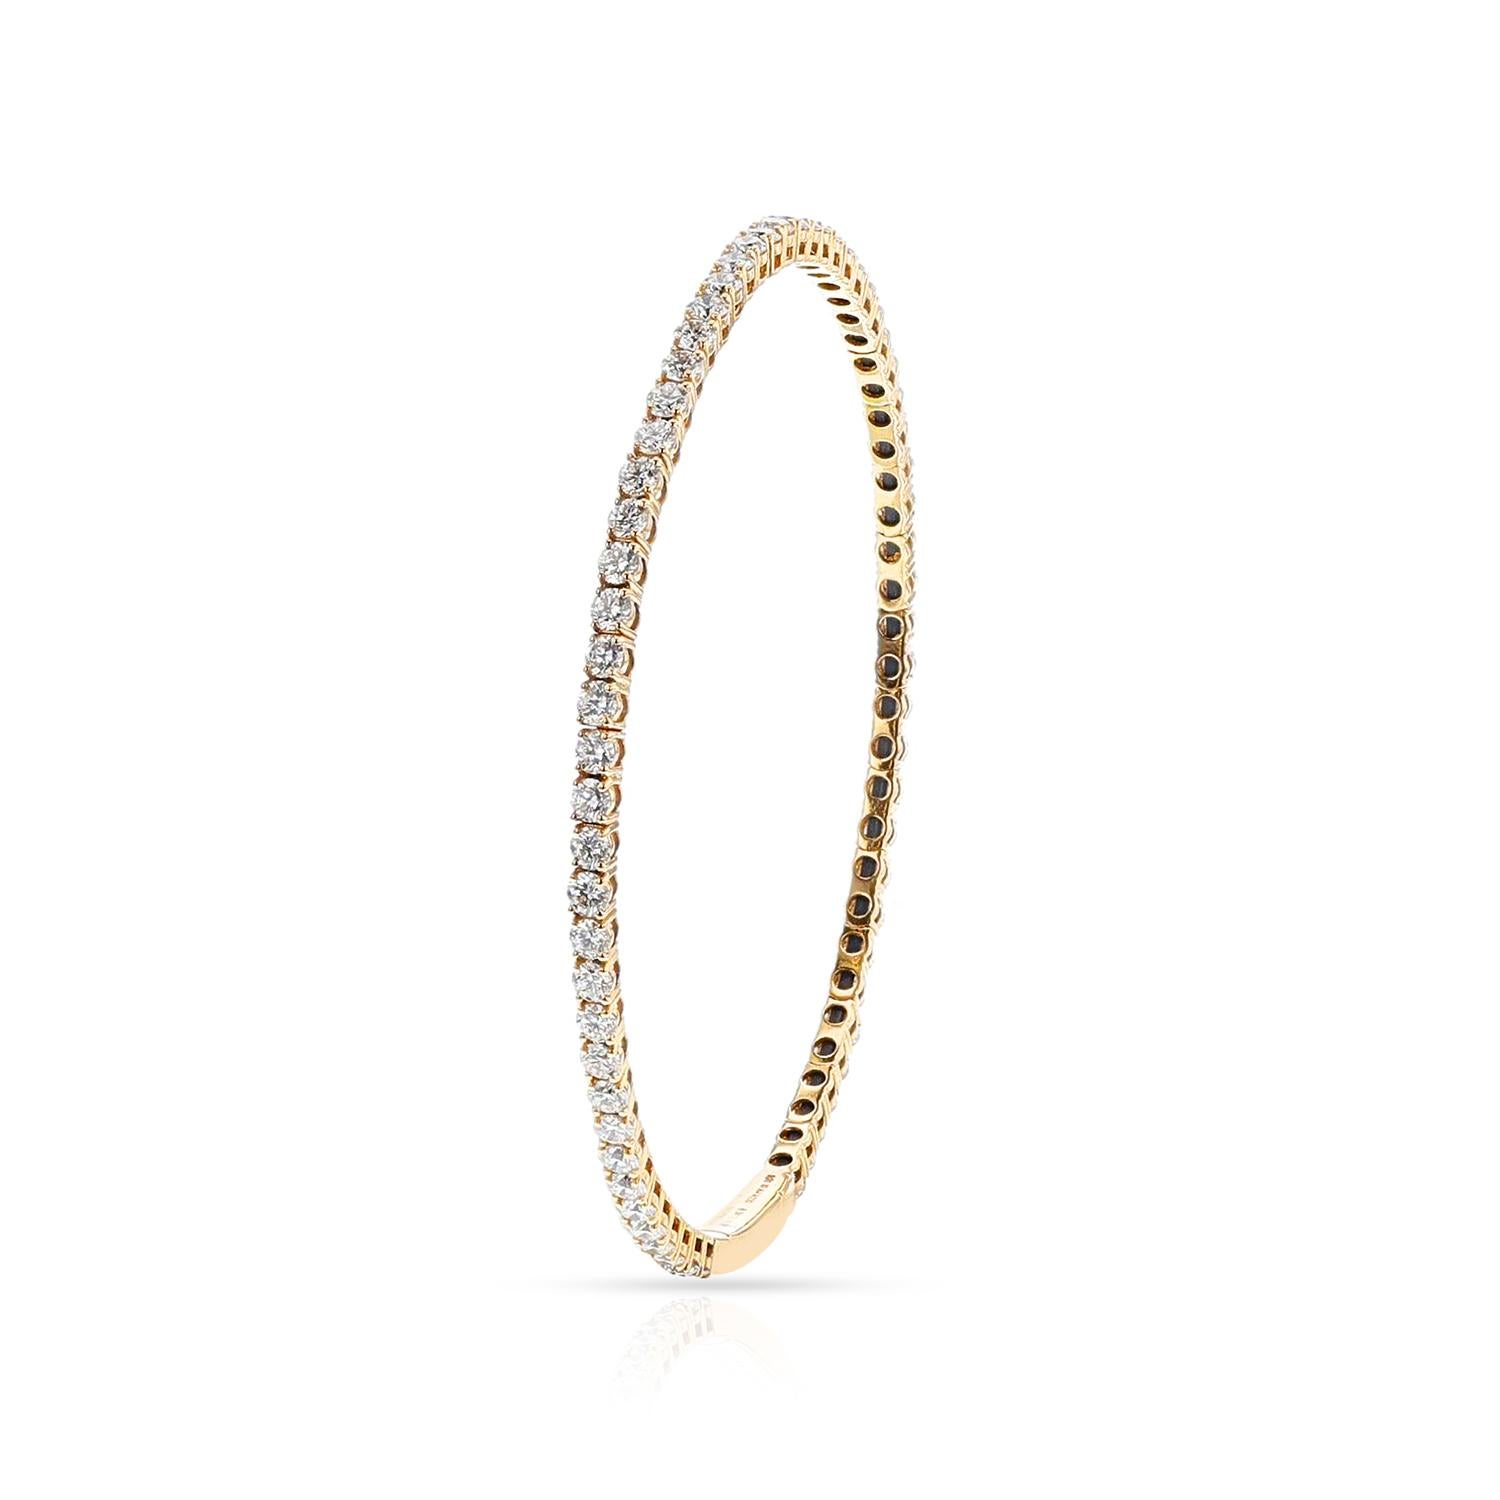 A Flexible Diamond Bangle with 3.93 cts. of Diamonds made in 18k Yellow Gold. The clarity is VS2/SI1, and the color is G/H.  The total weight of the bangle is 7.36 grams. The diameter is 2.25